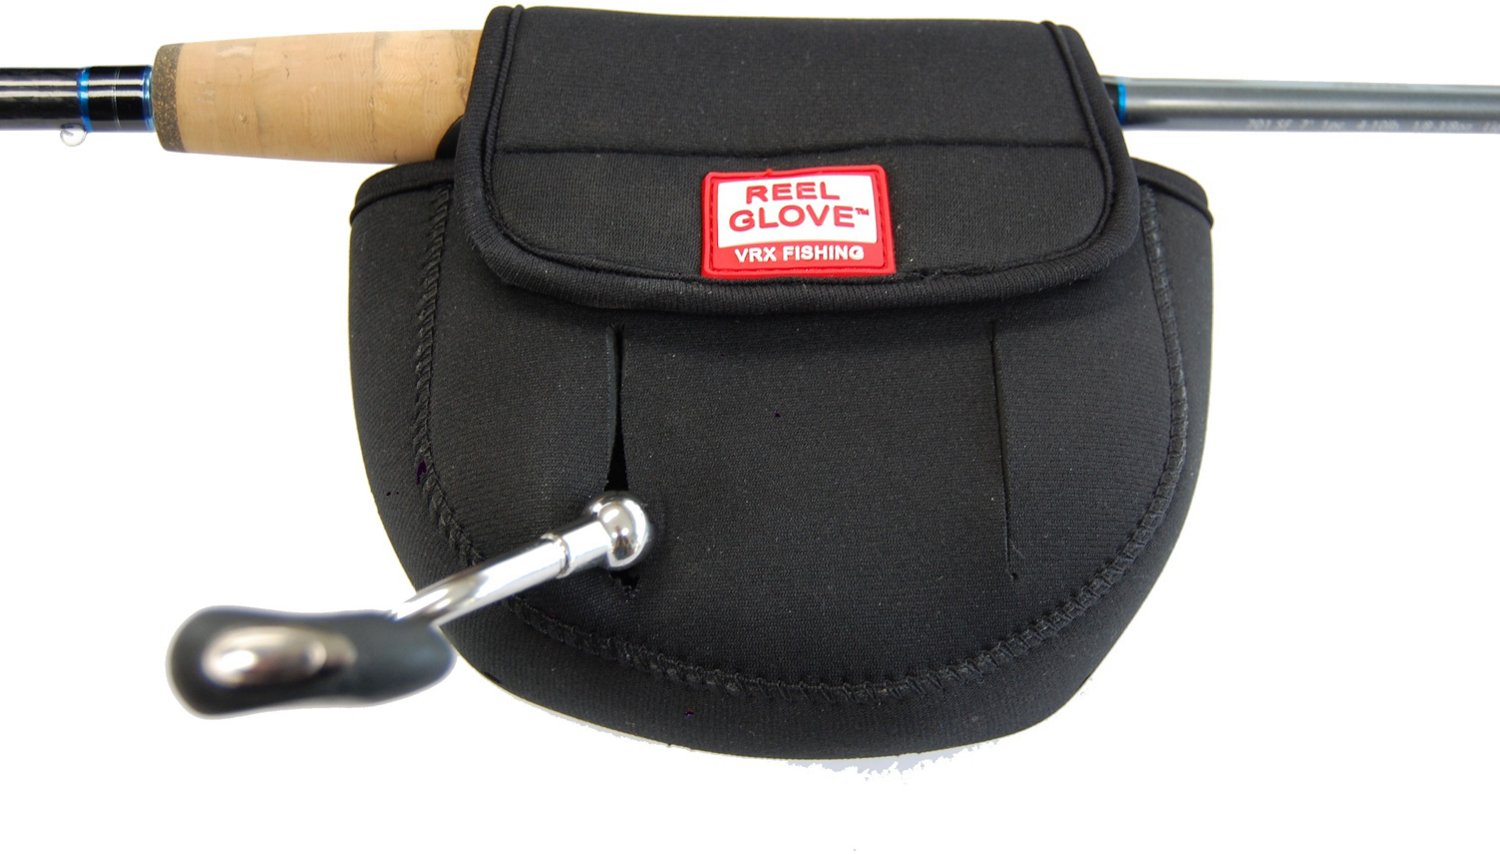 The Rod Glove Spinning Reel Glove Cover